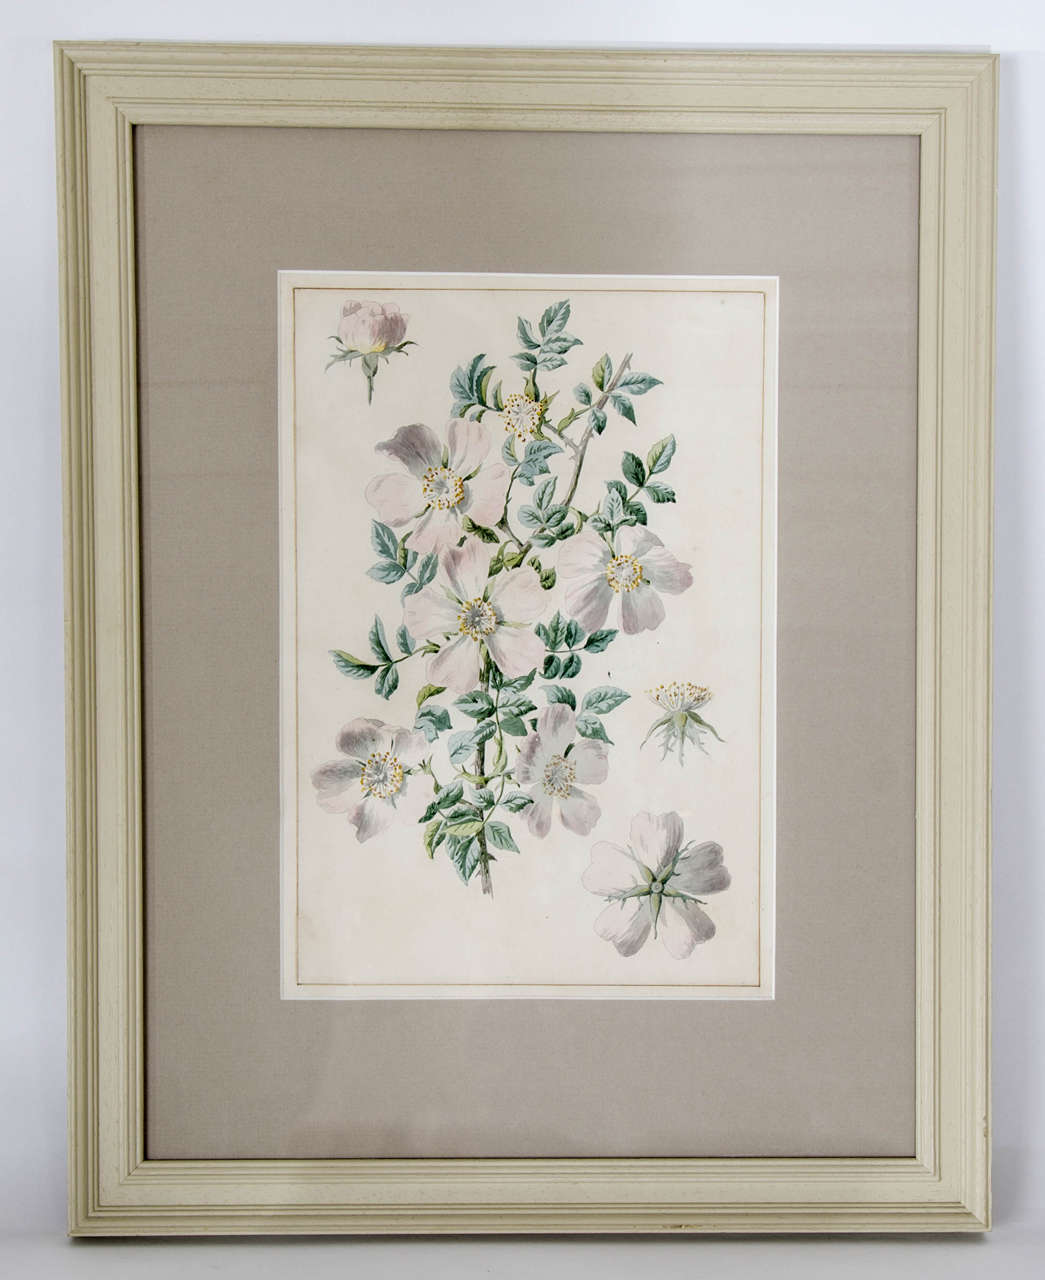 A charming pair of early 20th century botanical watercolours by Dr Francis Martin Russell.

English, circa 1900
DR FRANCIS MARTIN RUSSELL (1820-1915) 
Francis Martin Russell was born in Marlborough, Wiltshire the son of an ironmonger. His father